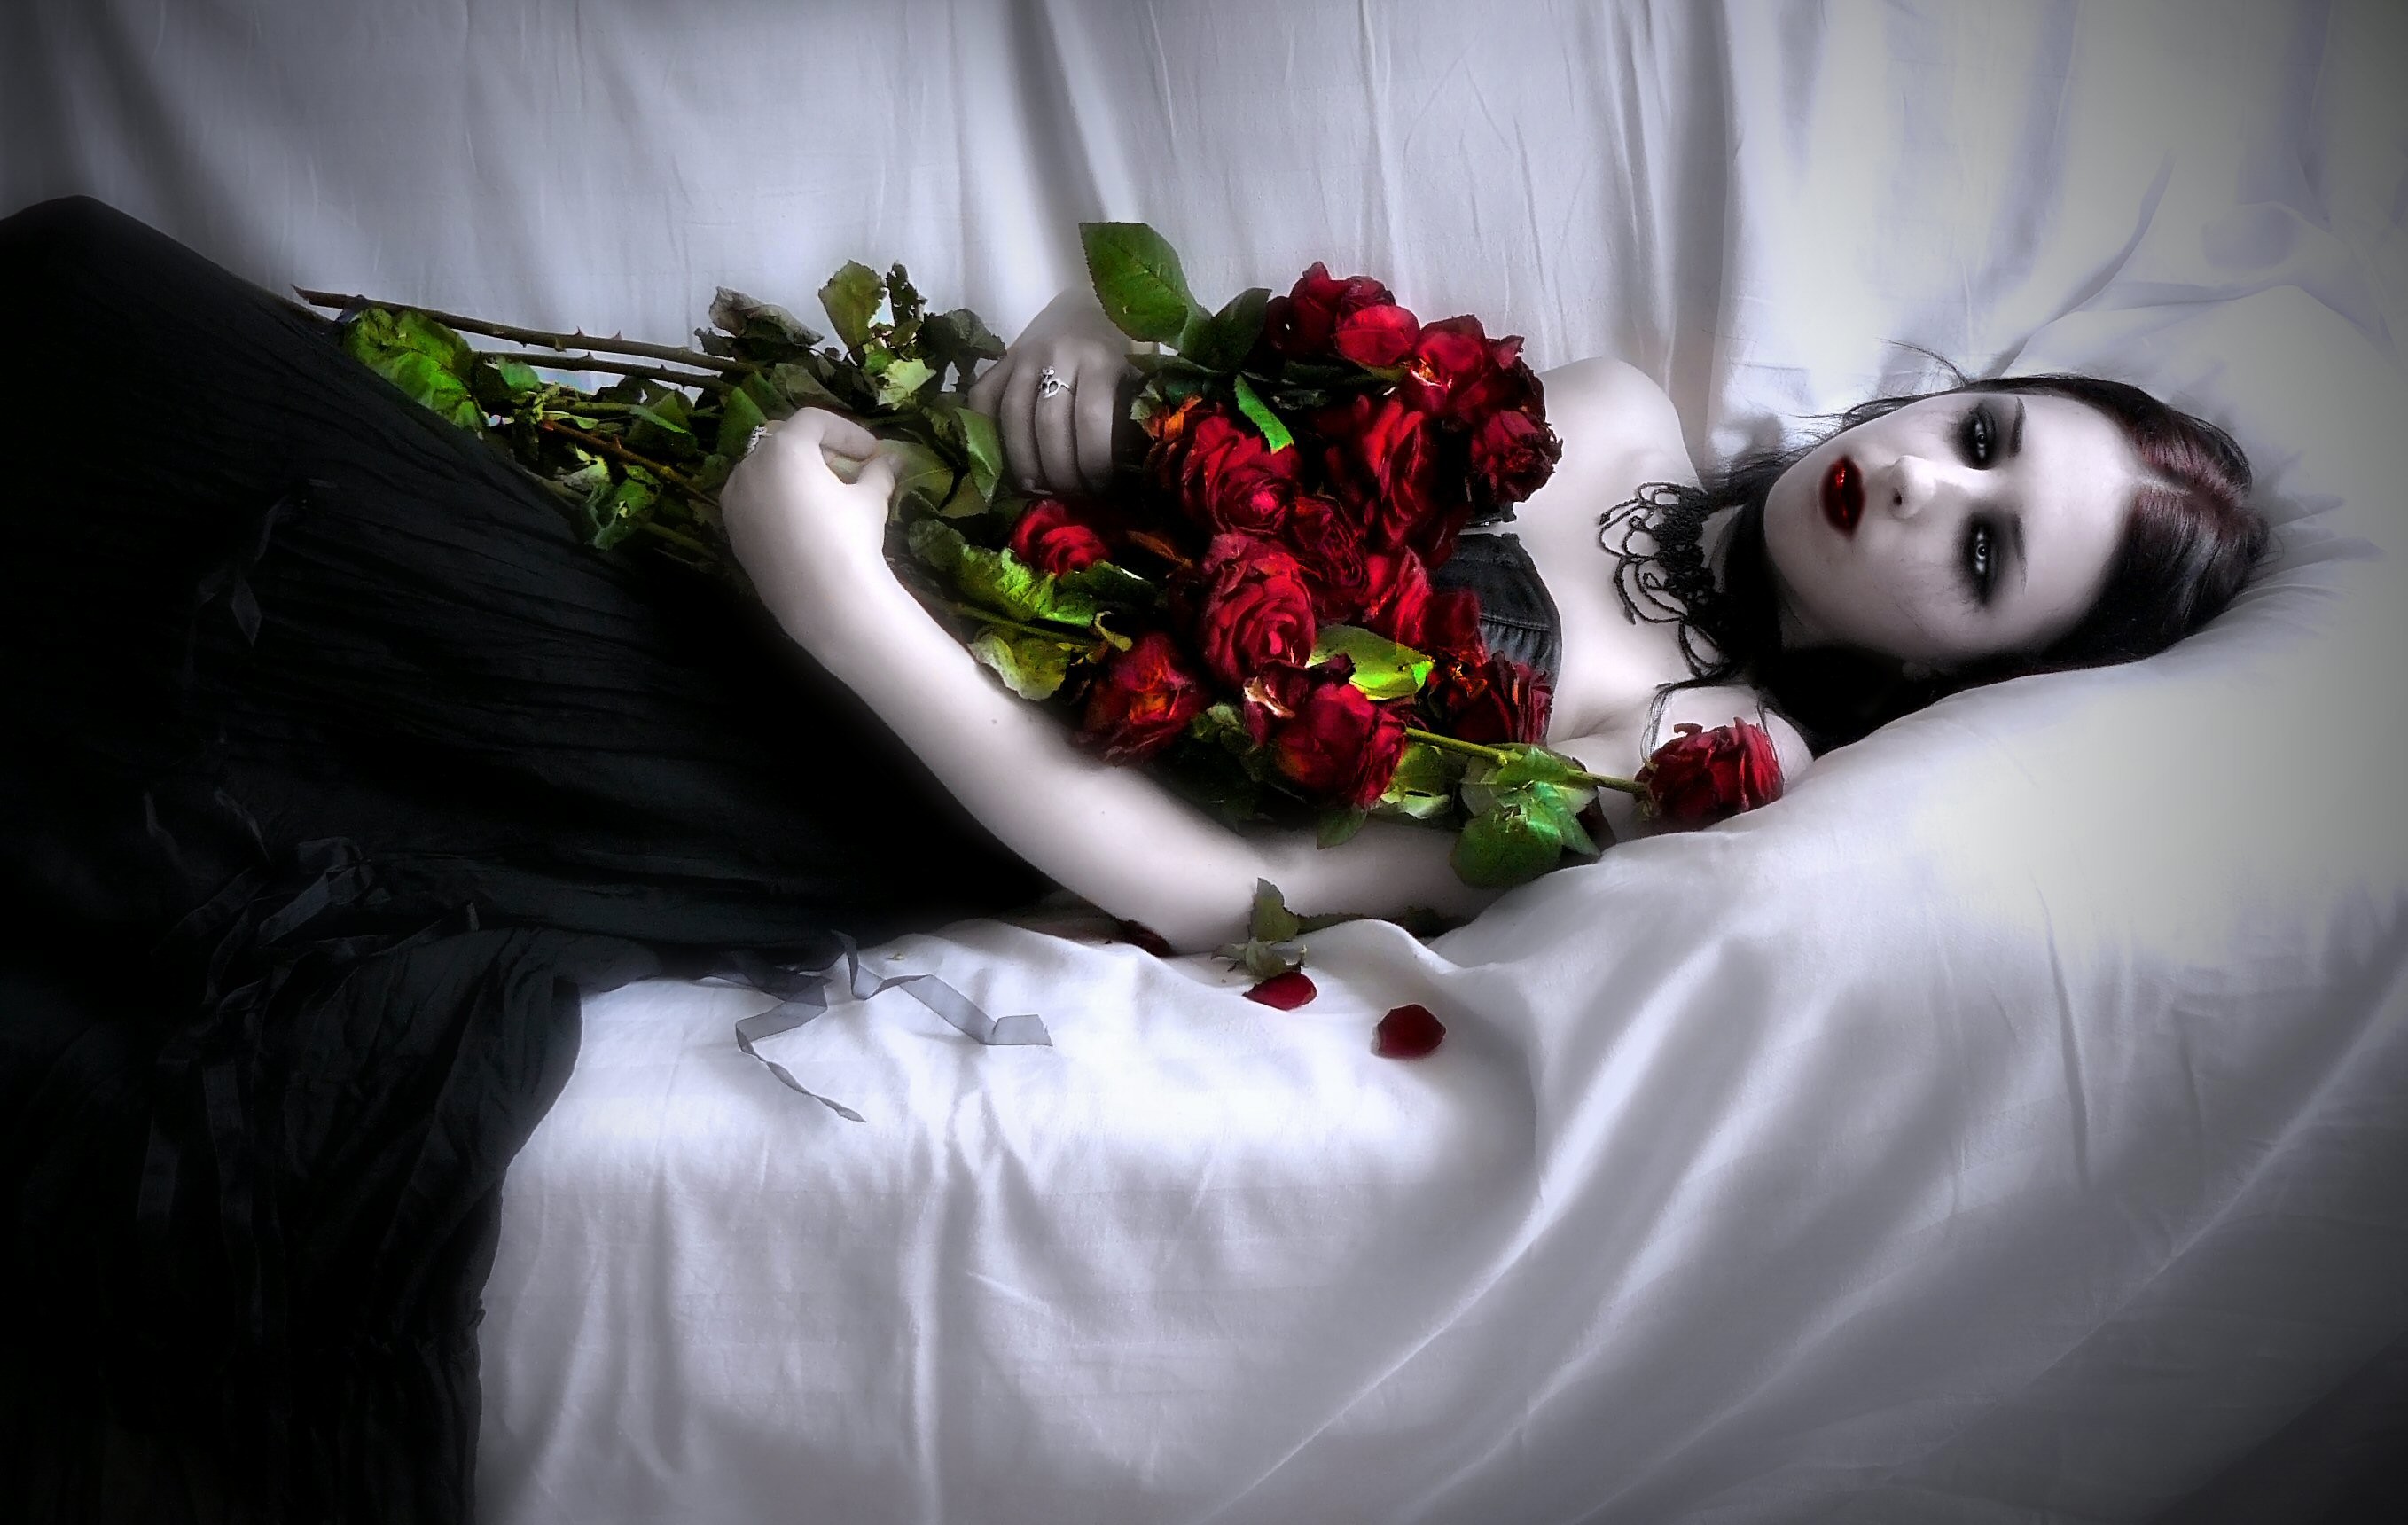 2716x1720 Vampire Arina with roses wallpaper from Vampire wallpapers